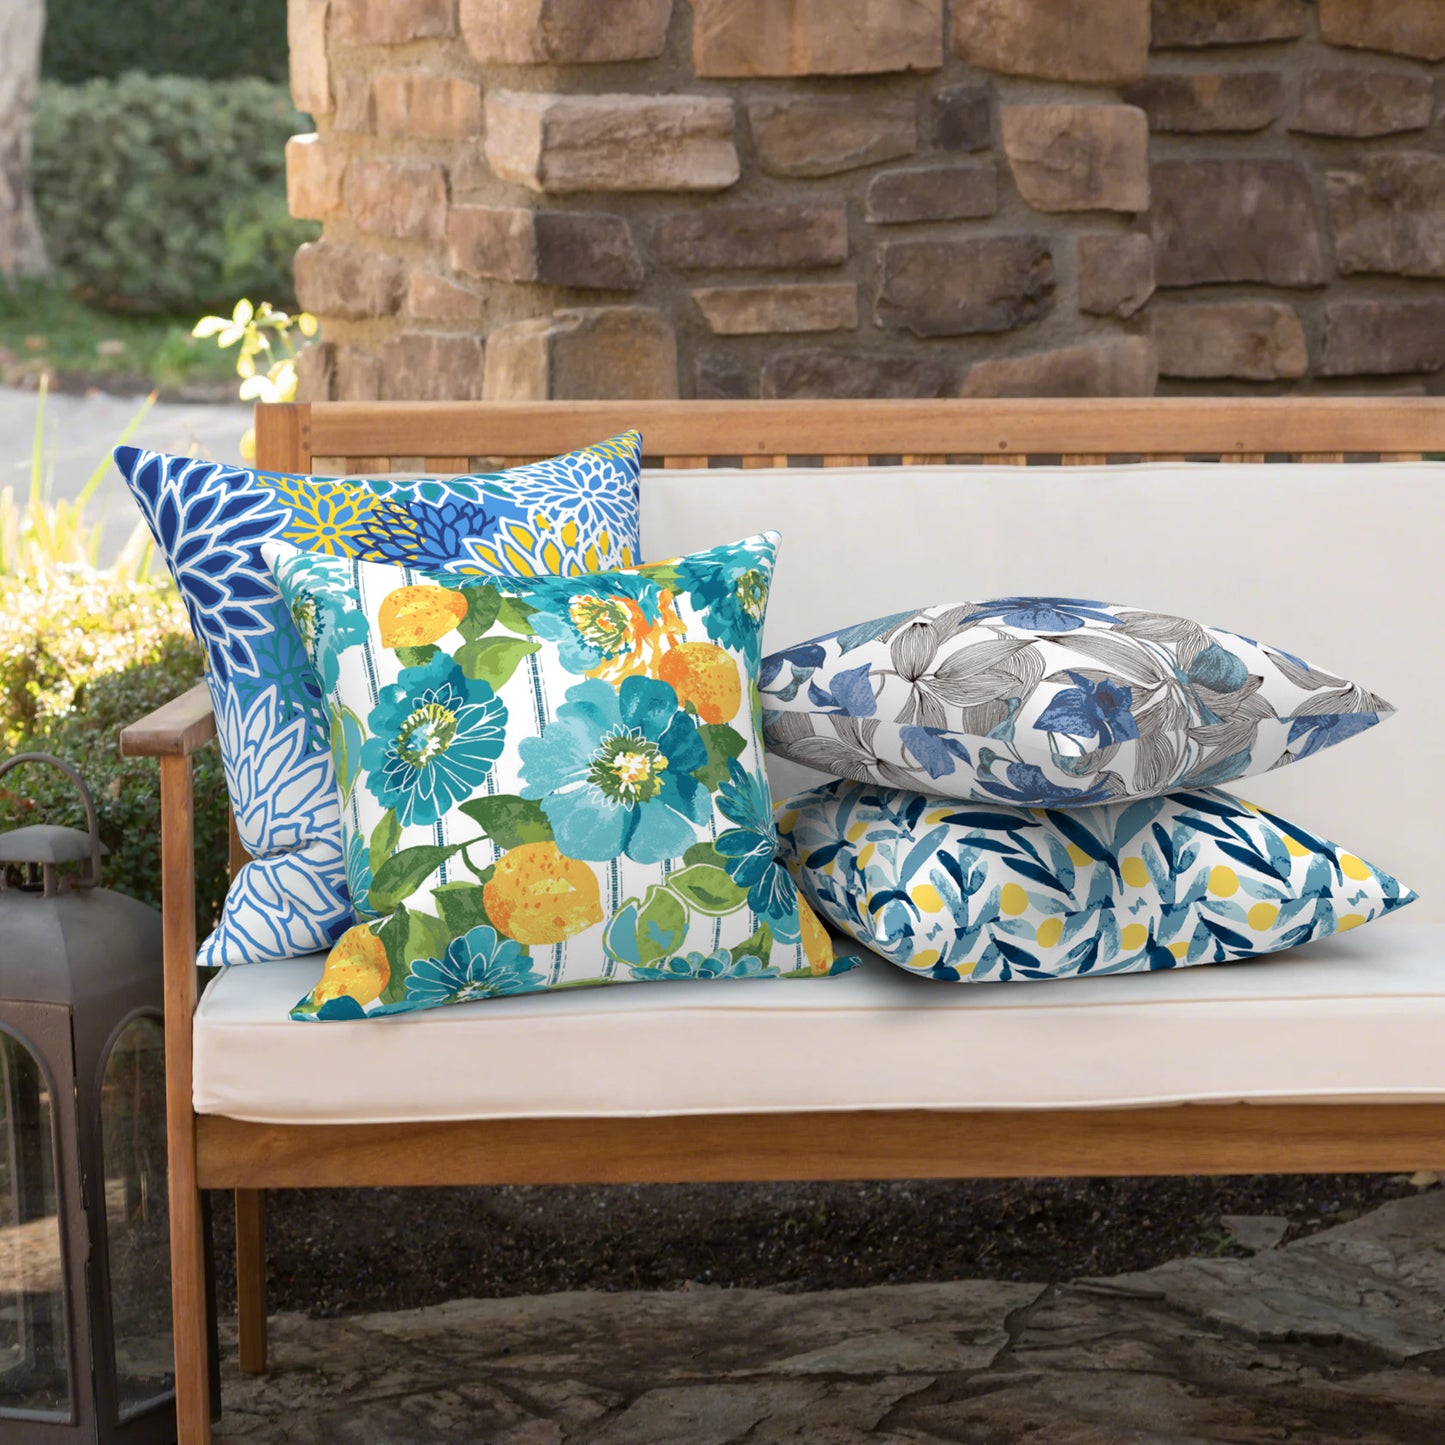 Melody Elephant Outdoor/Indoor Throw Pillow Covers Set of 2, All Weather Square Pillow Cases 16x16 Inch, Patio Cushion Pillow of Home Furniture Use, Dahlia Blue